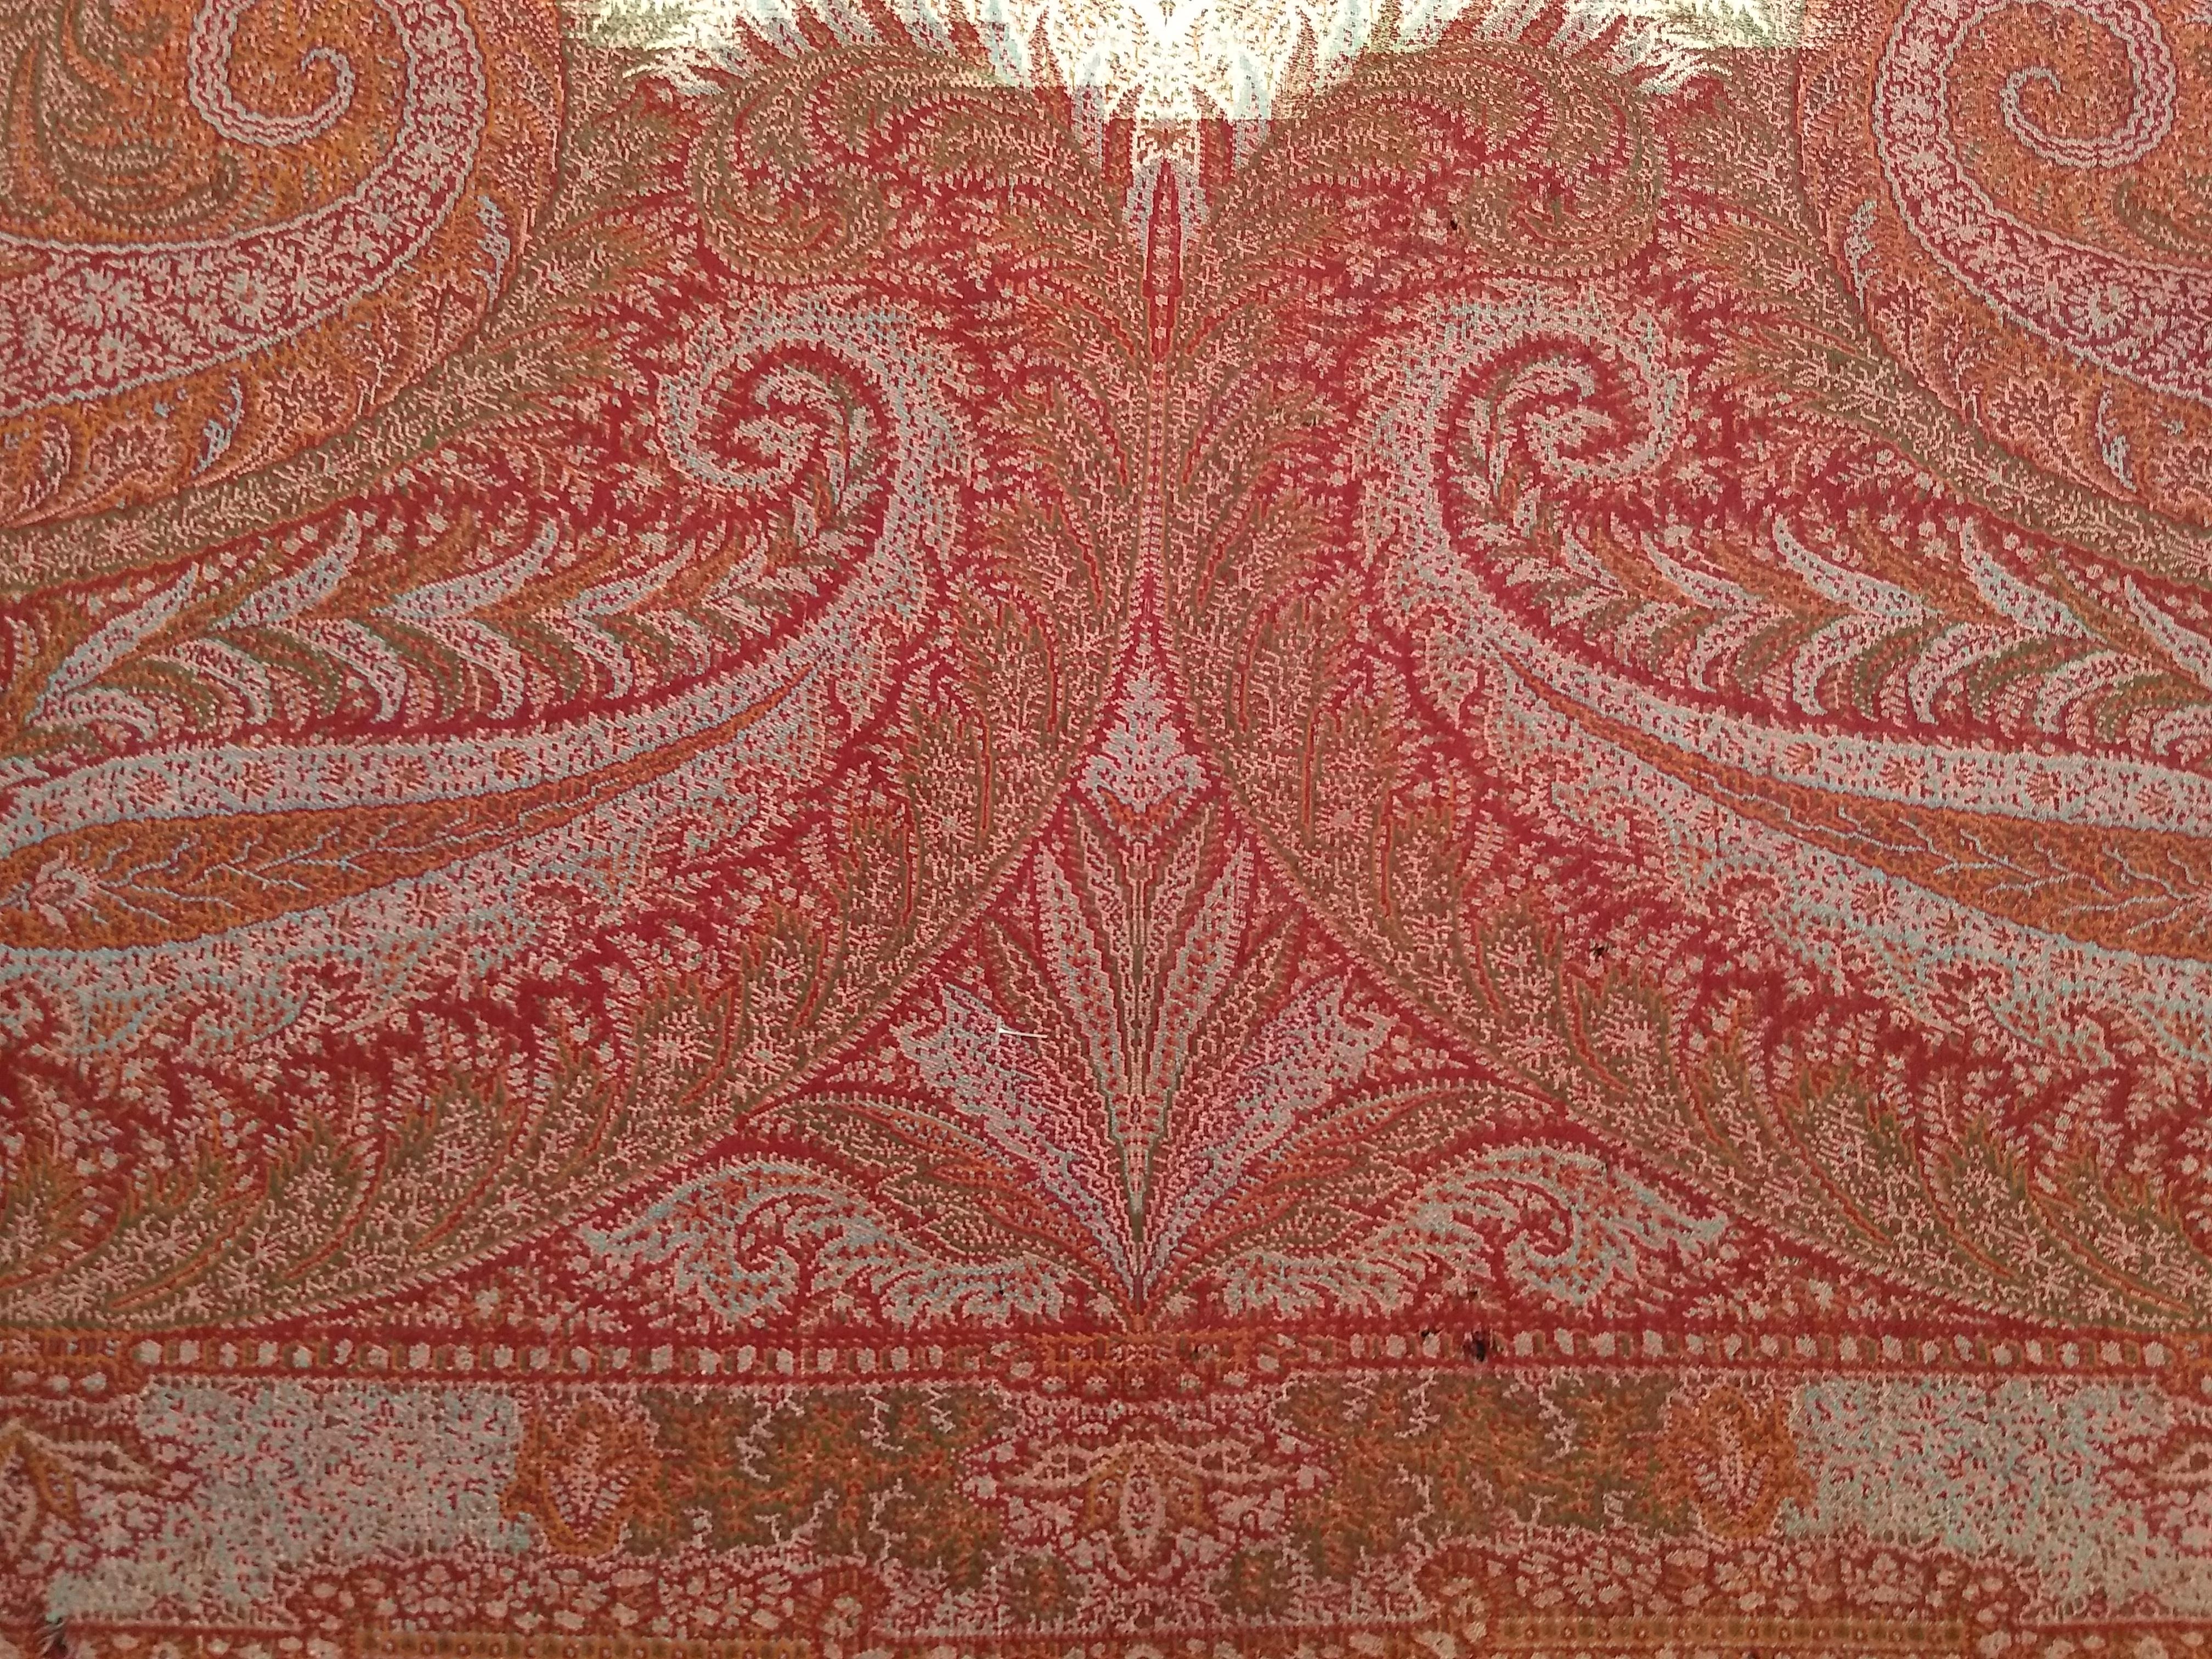 Mid 19th Century Paisley Shawl in Red, Ivory, Black, Green. Orange For Sale 2